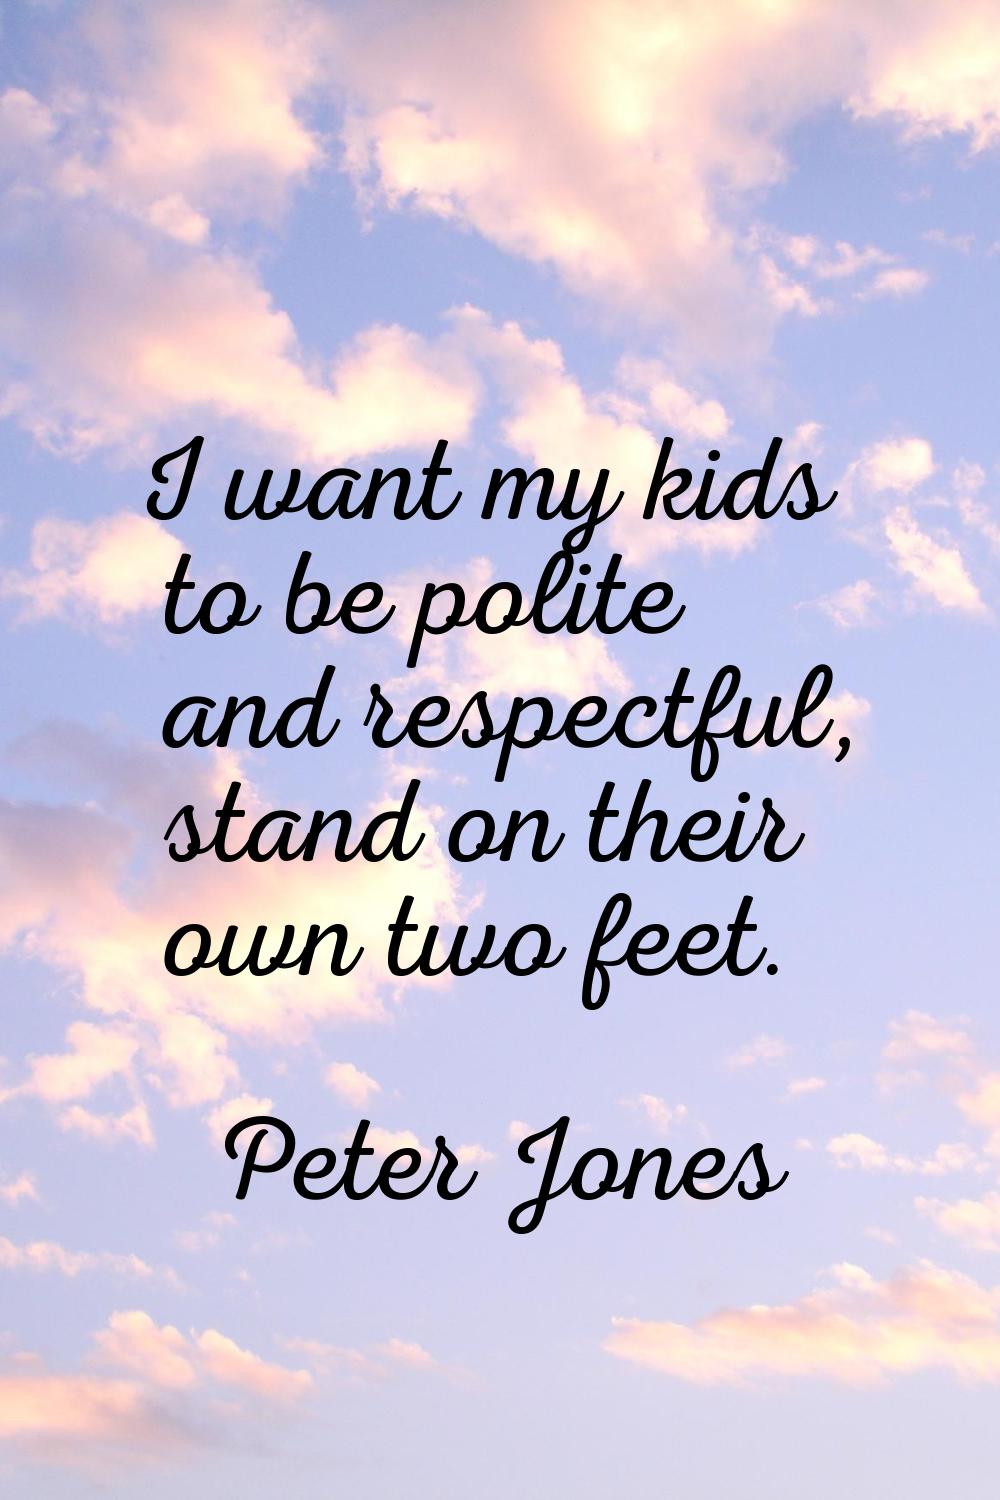 I want my kids to be polite and respectful, stand on their own two feet.